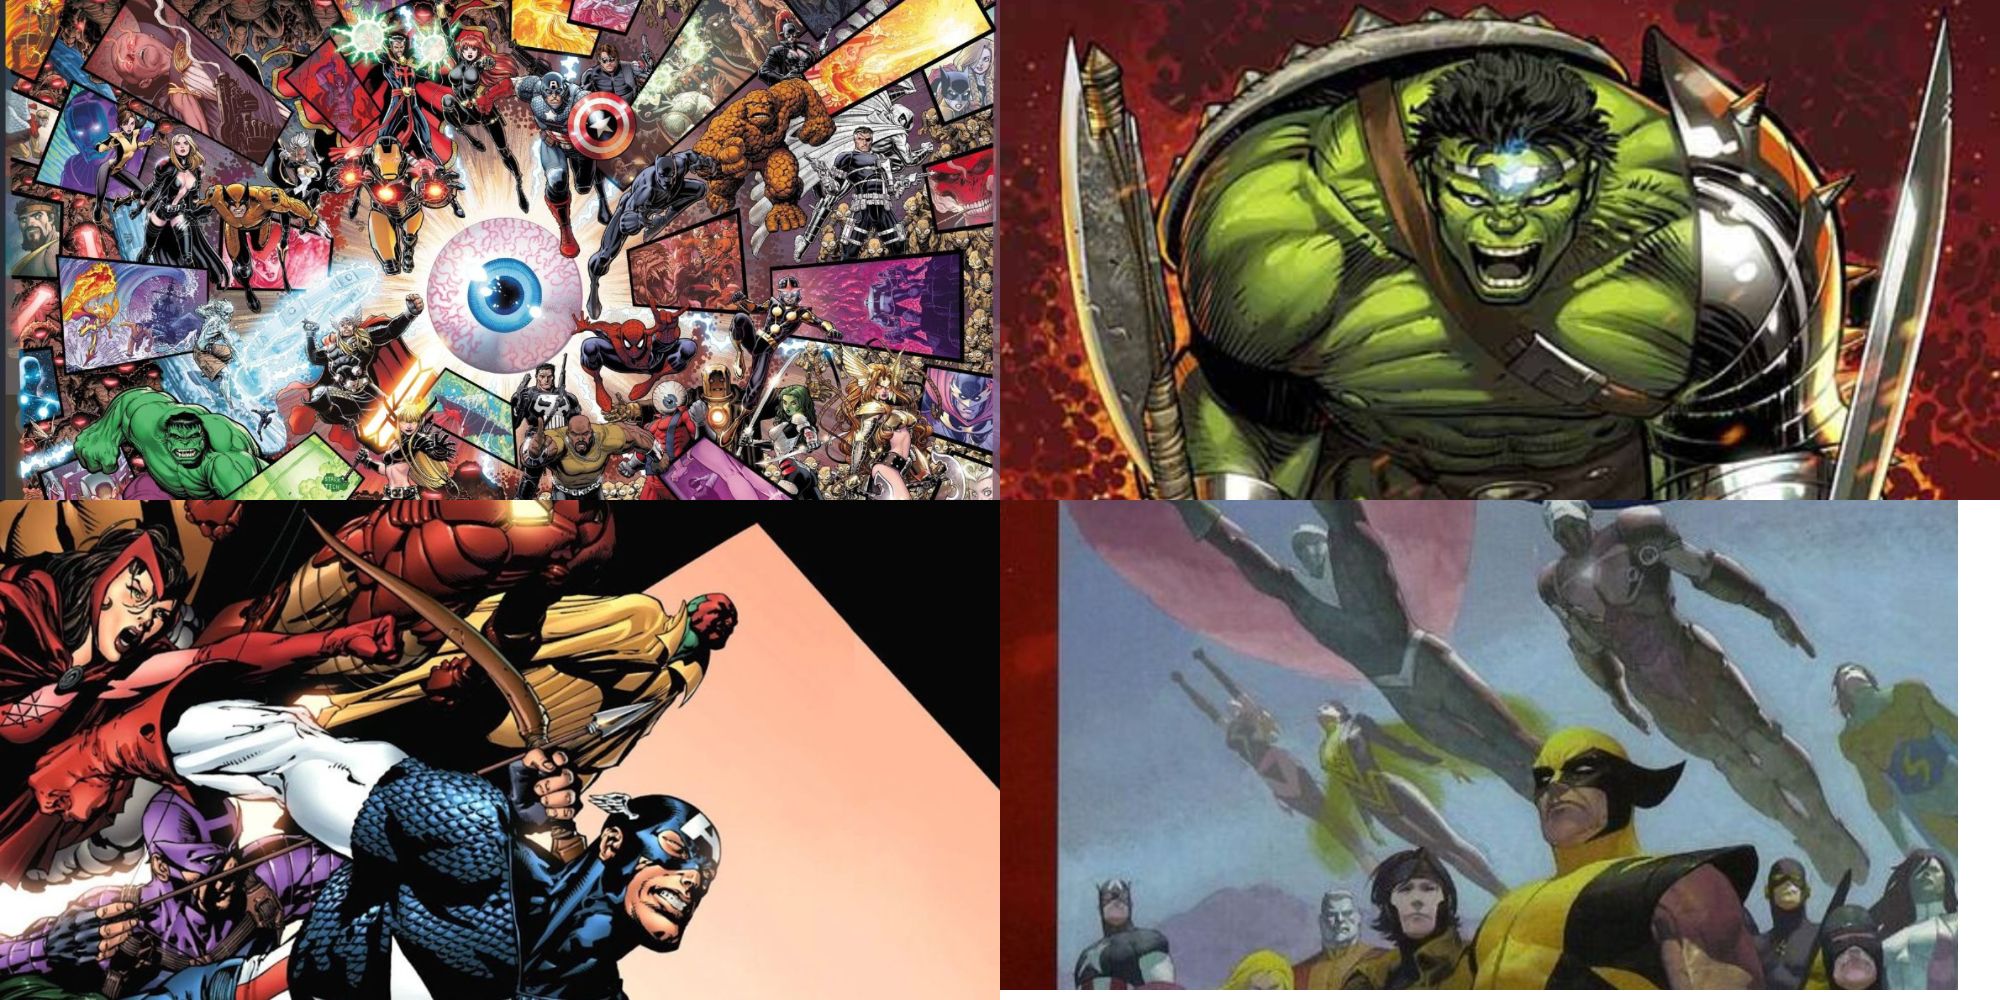 Photo Collage of Marvel's Avengers, Hulk, and X-Men